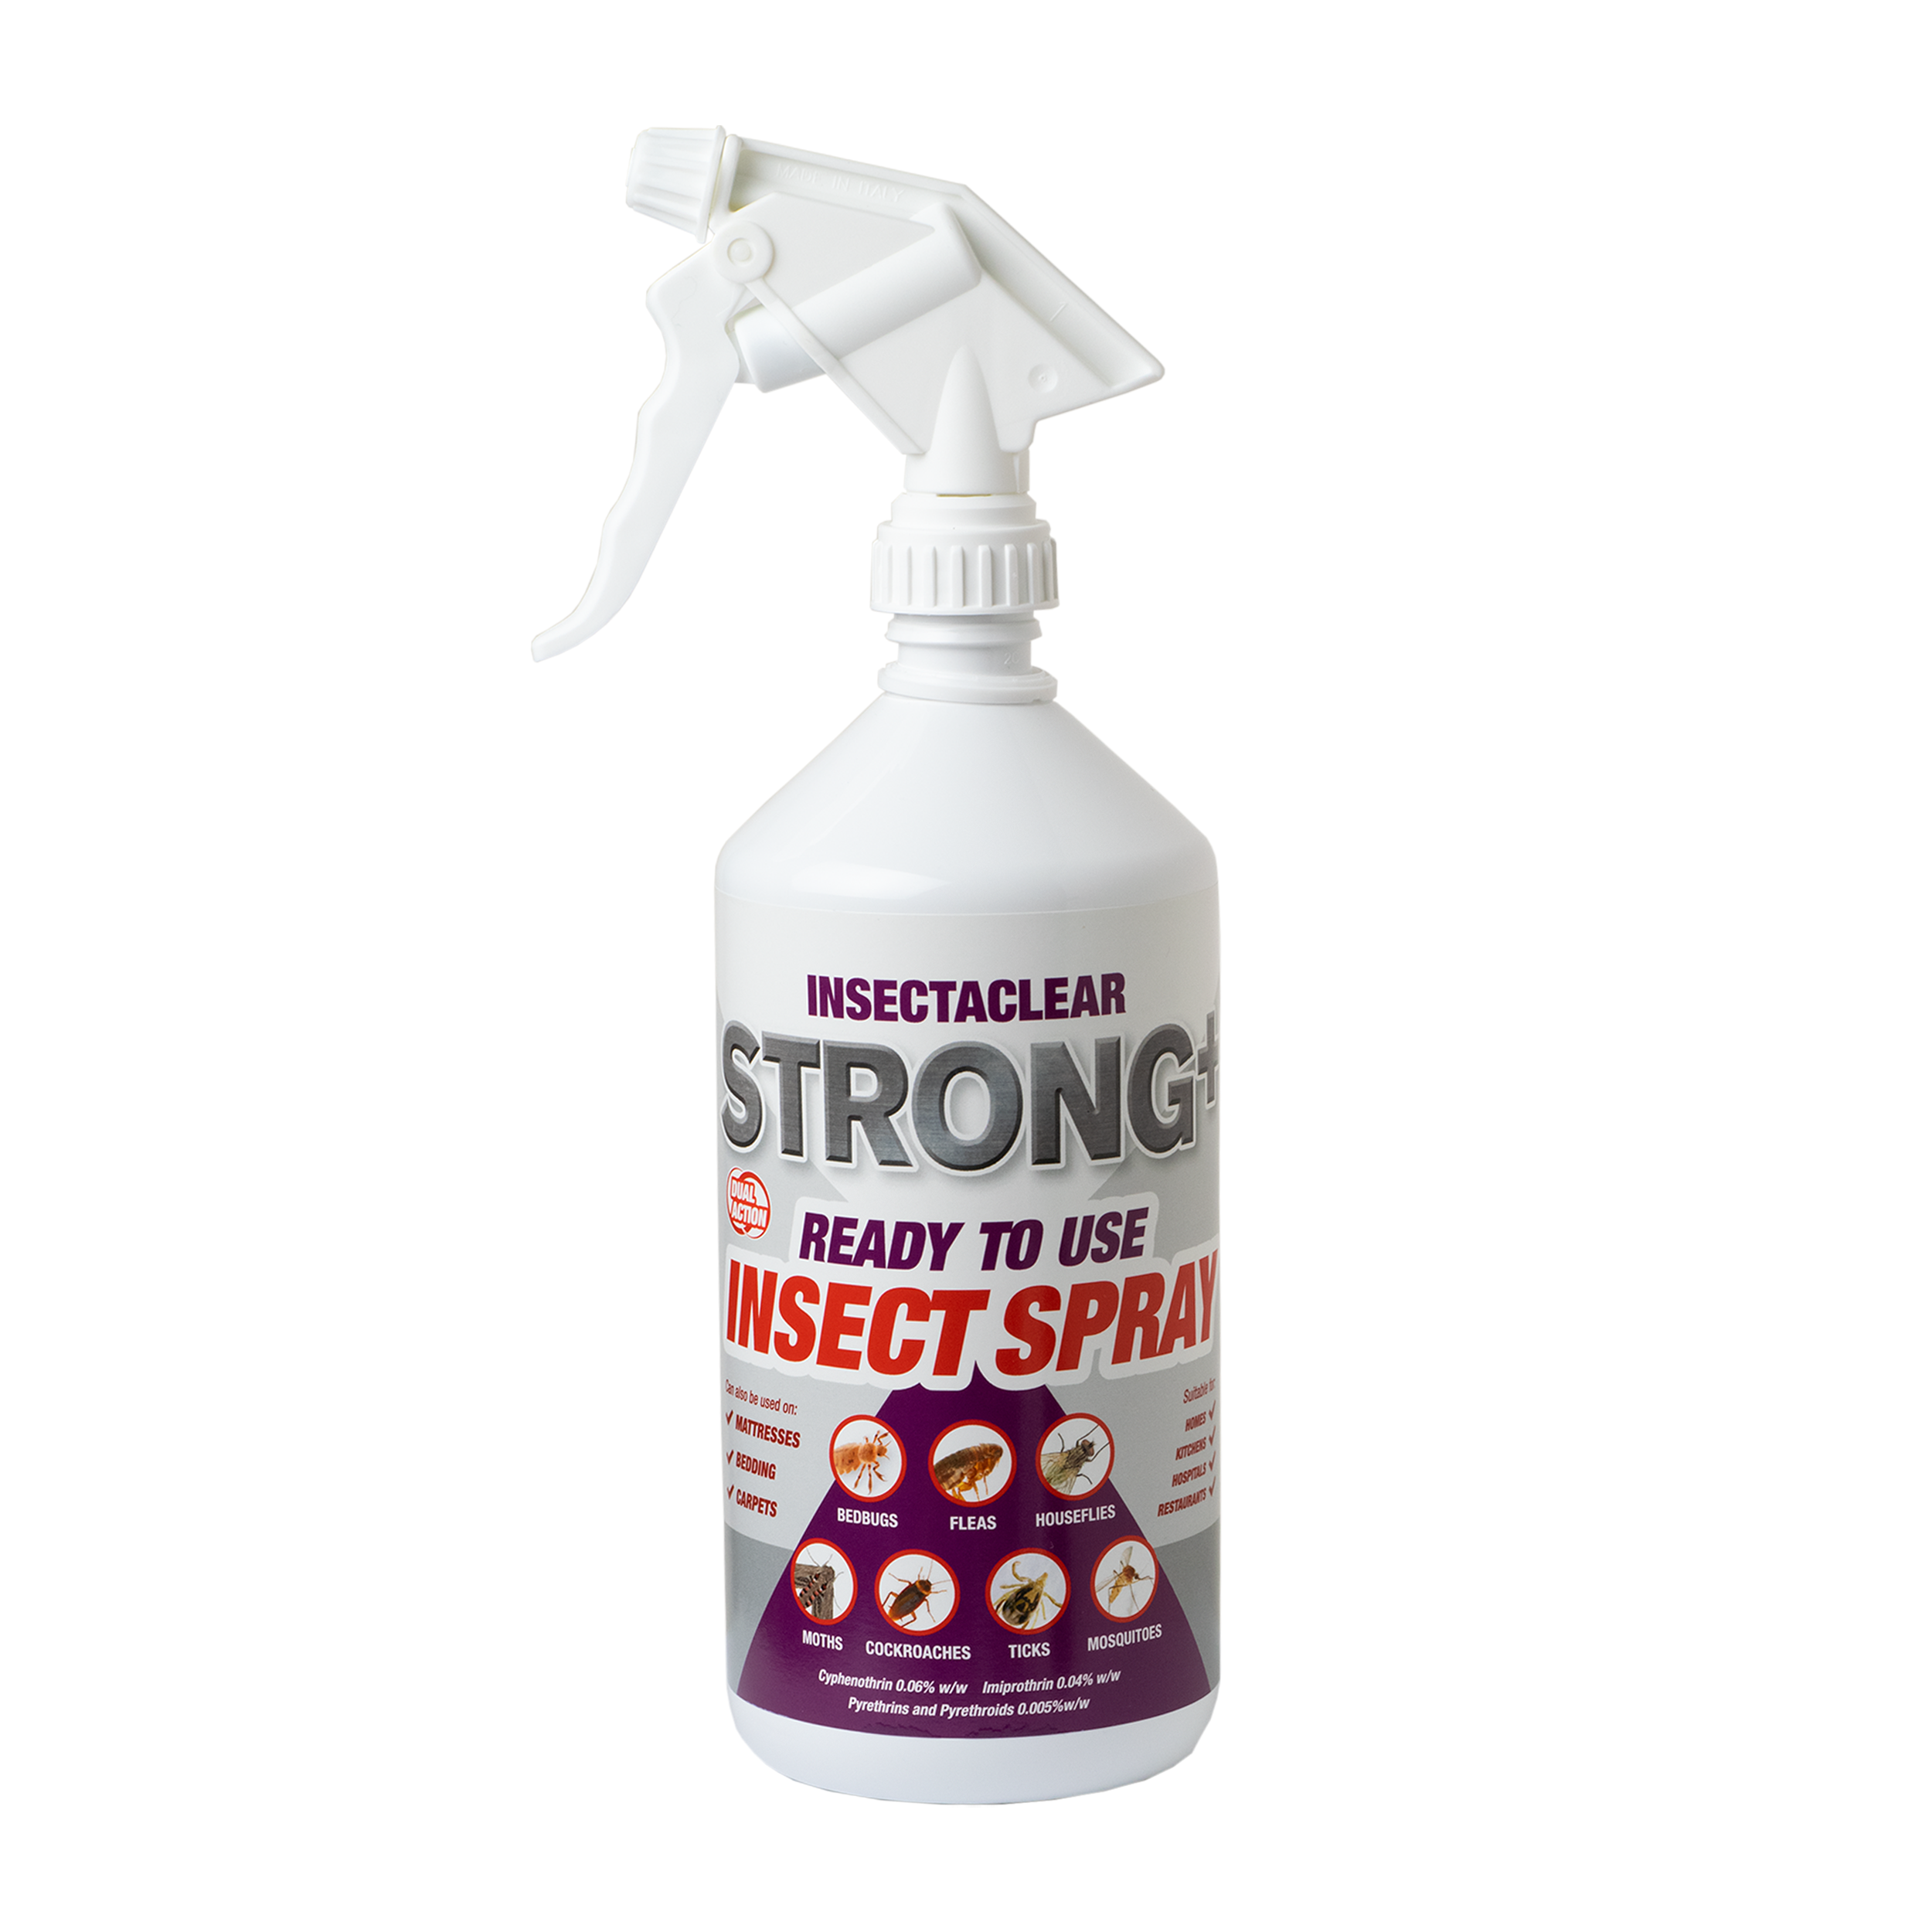 Insect Spray - Insectaclear STRONG 1 litre x 12 - Moth Control